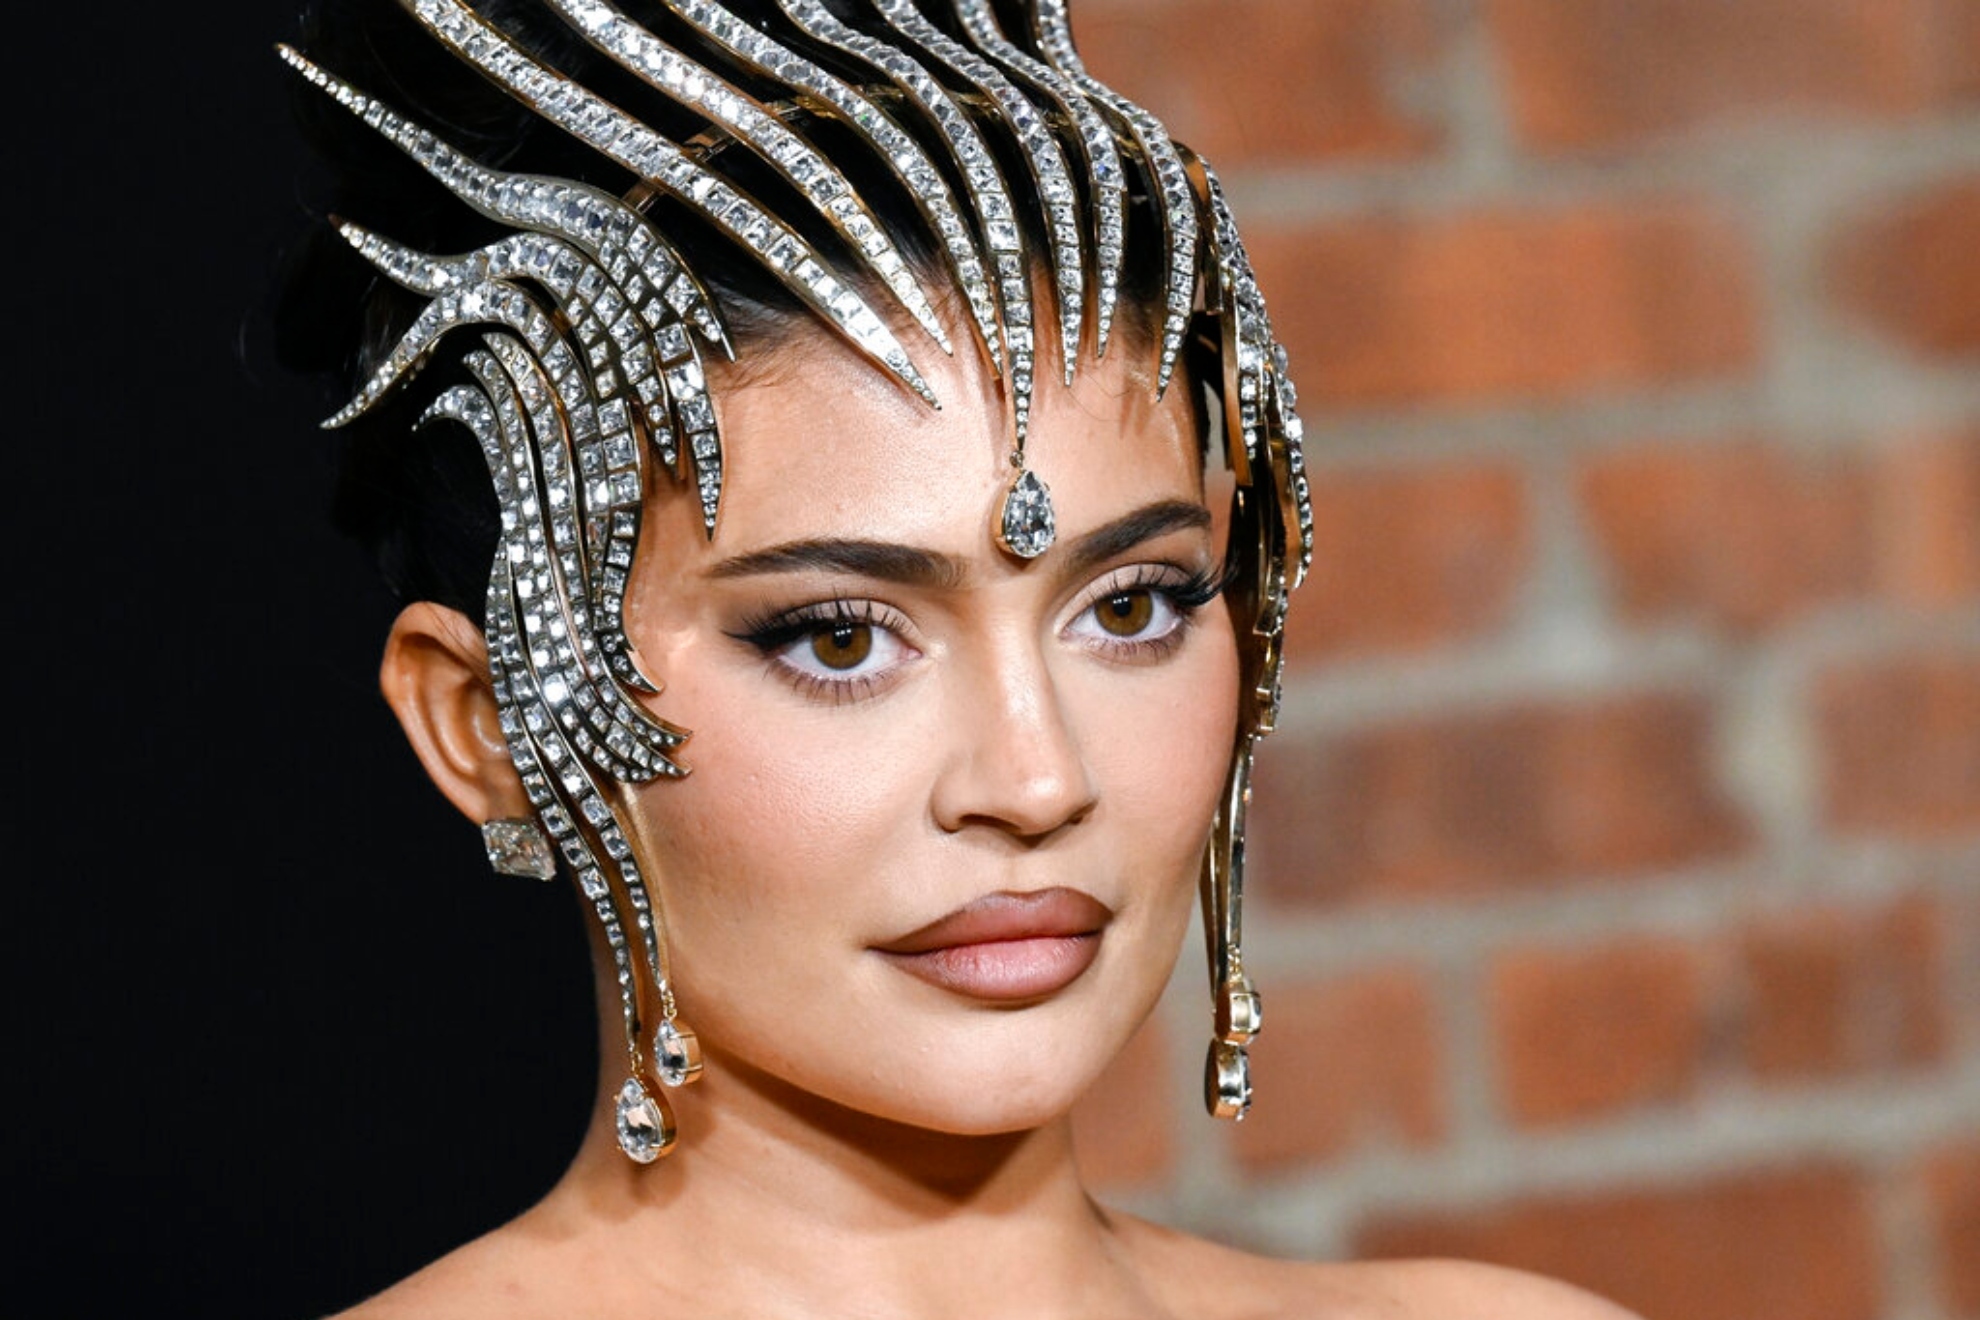 US beauty mogul Kylie Jenner trends with Arab designs in 2023